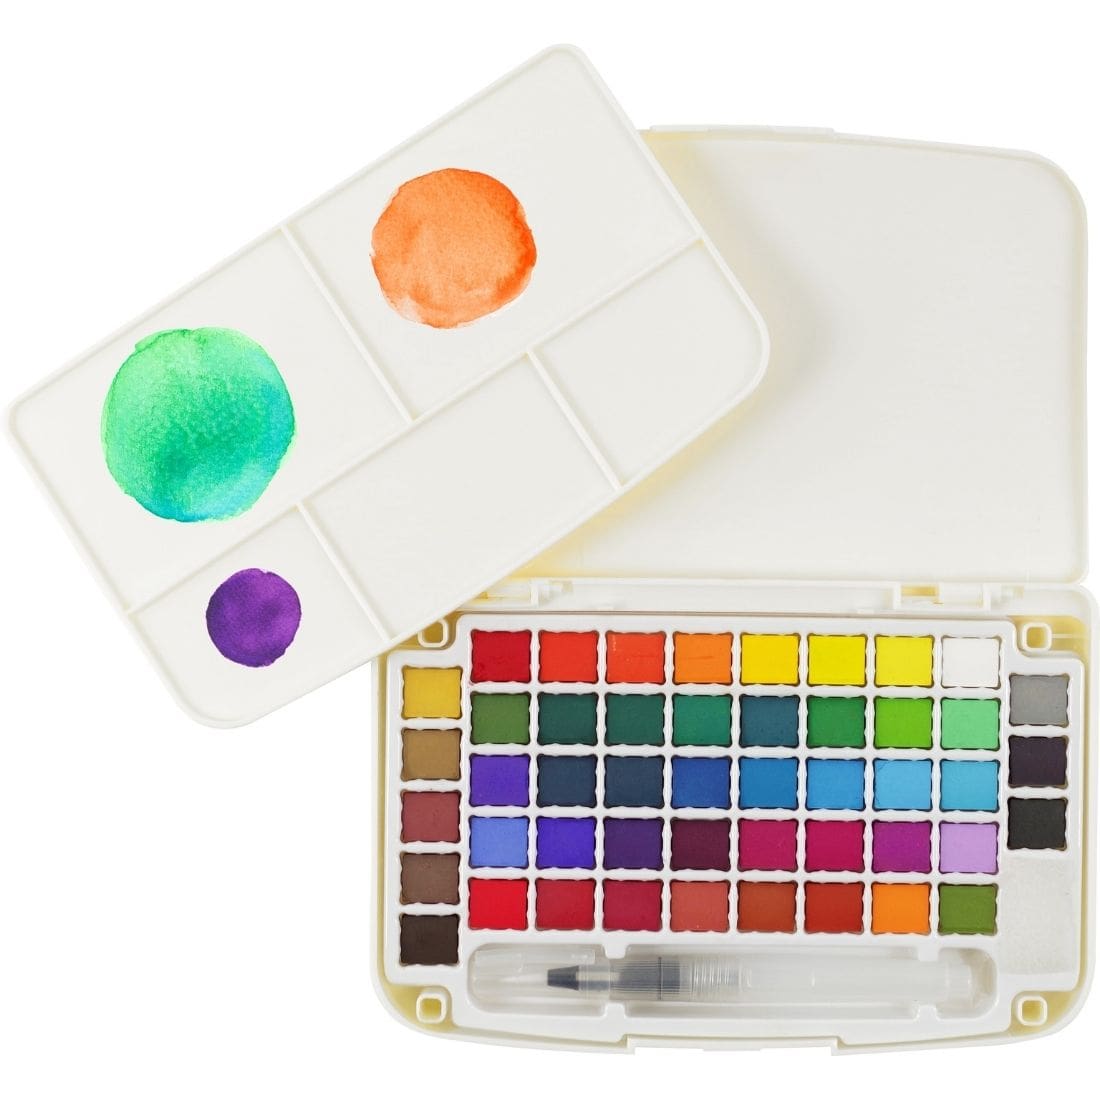 Peter Pauper Press watercolour pocket kit with a brush pen and mixing palette - Paper Kooka